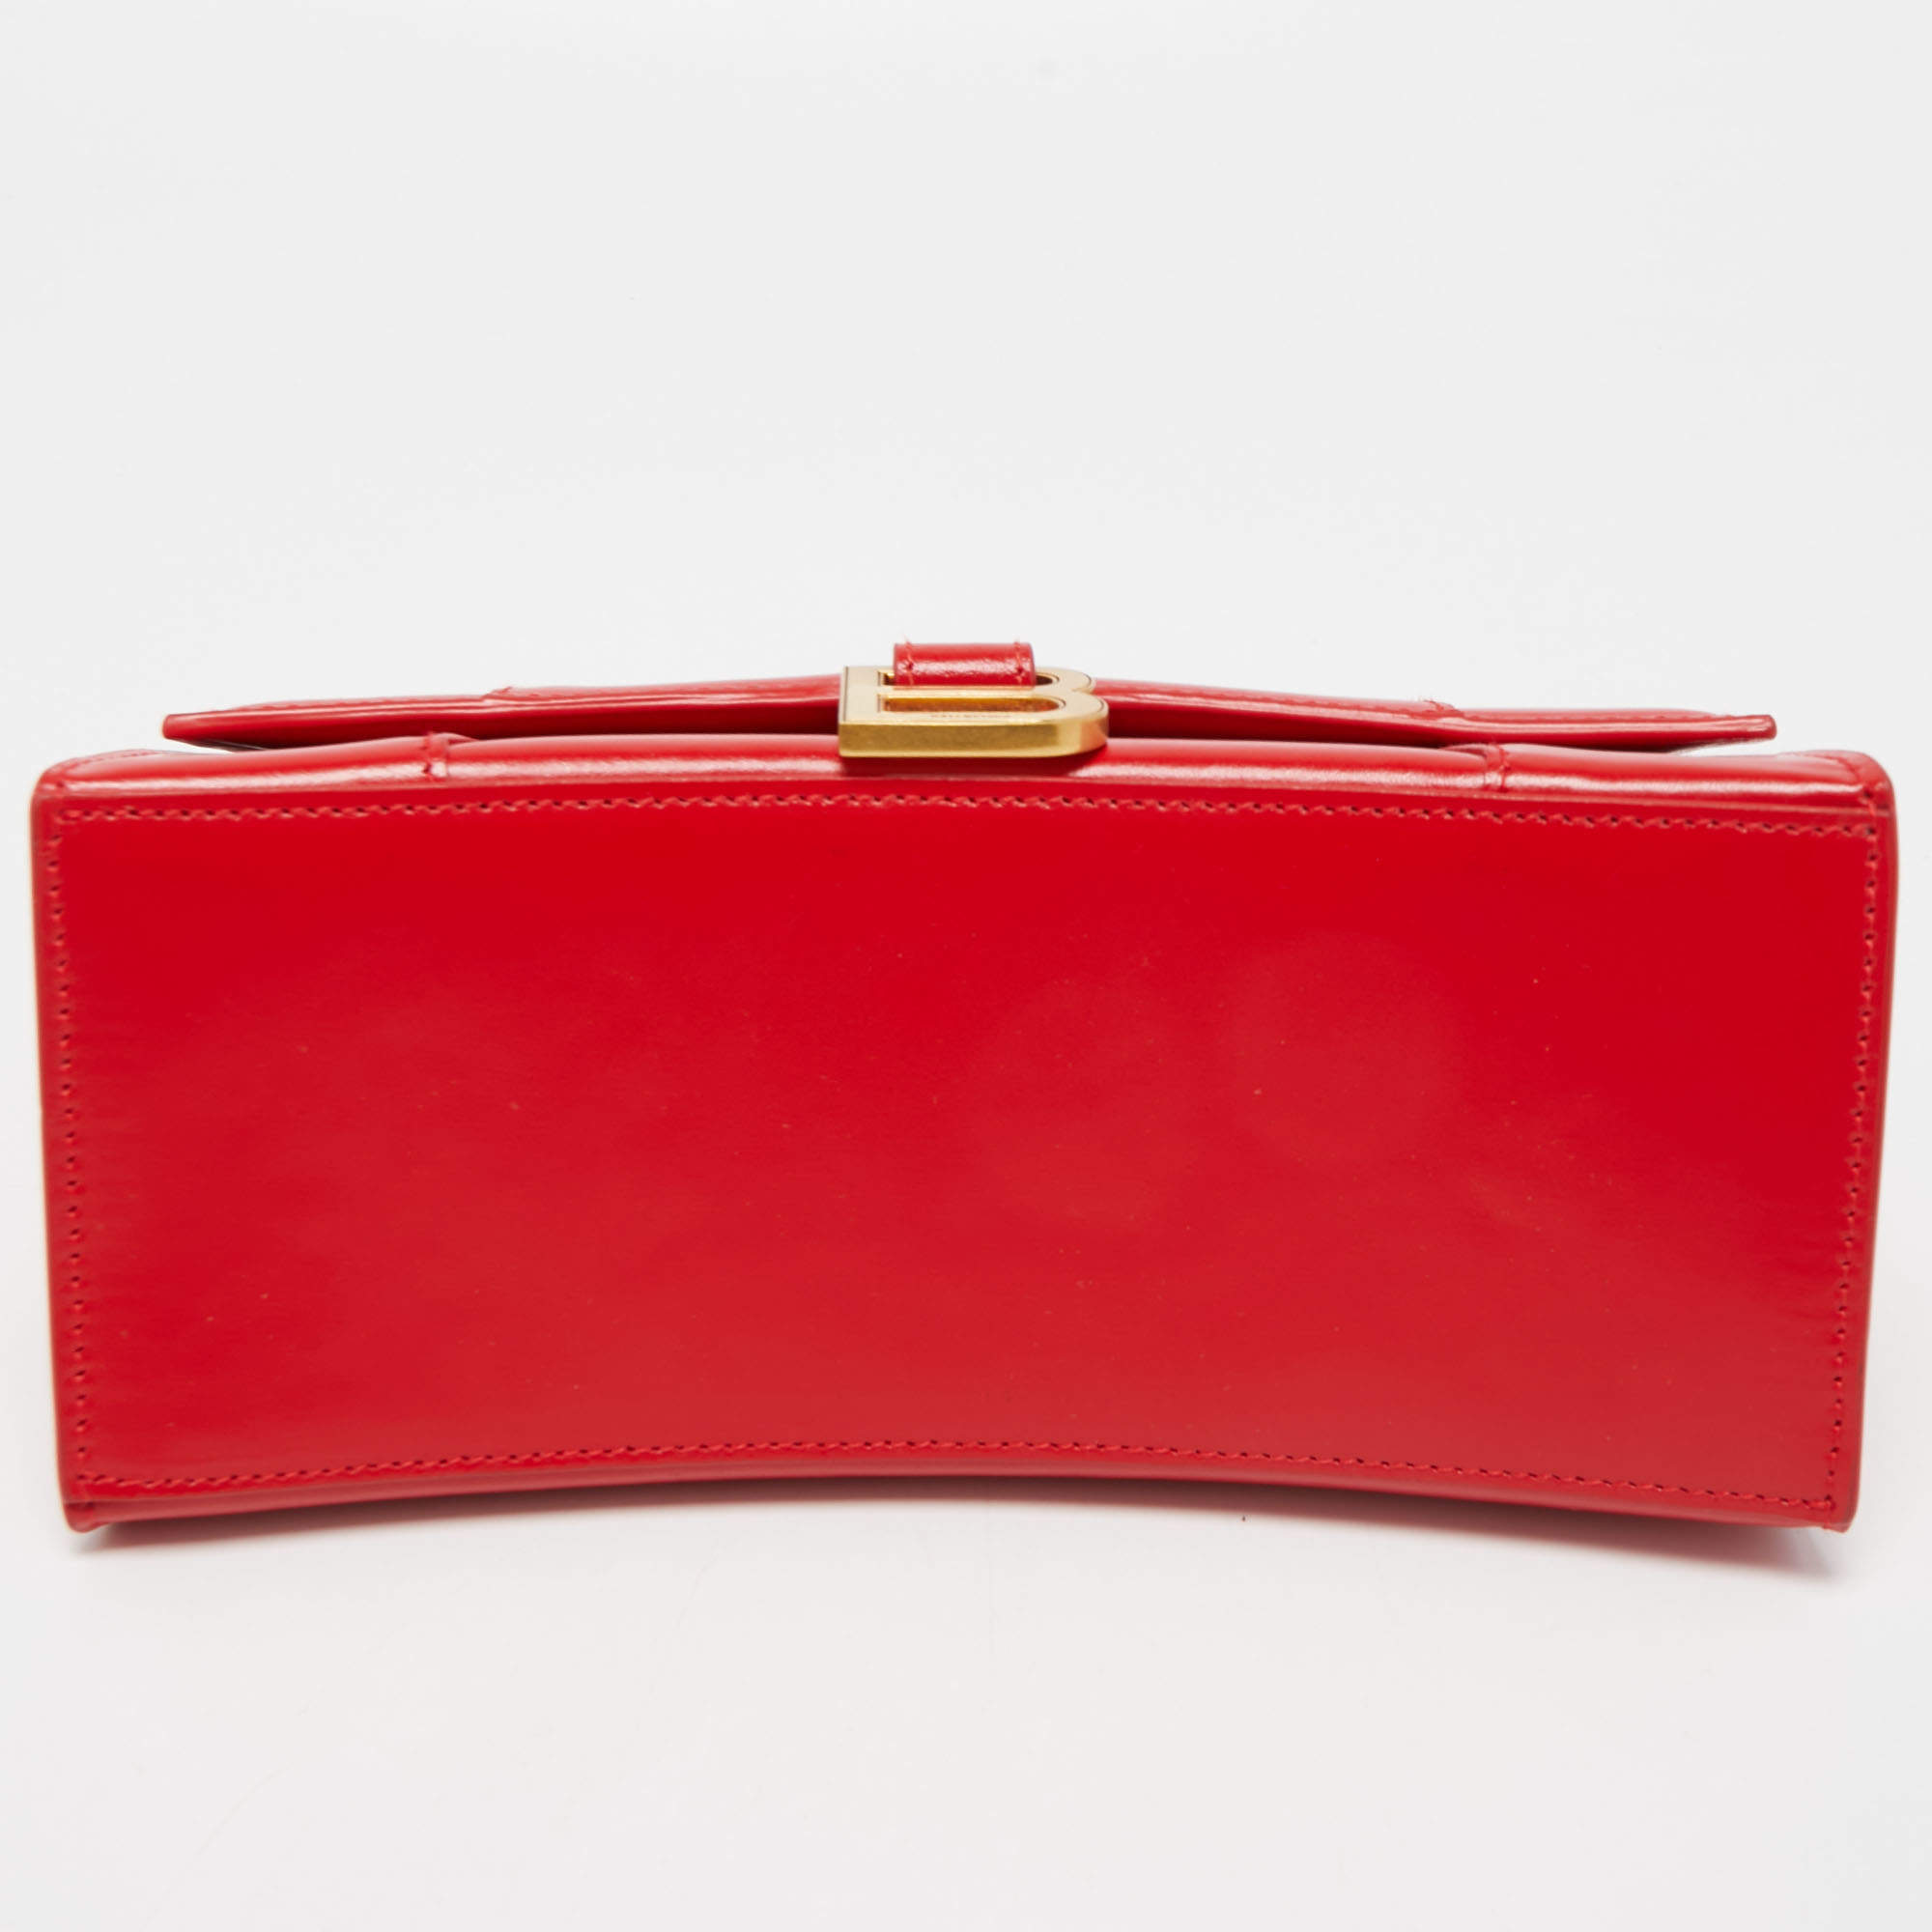 Hourglass leather handbag Balenciaga Red in Leather - 34197350